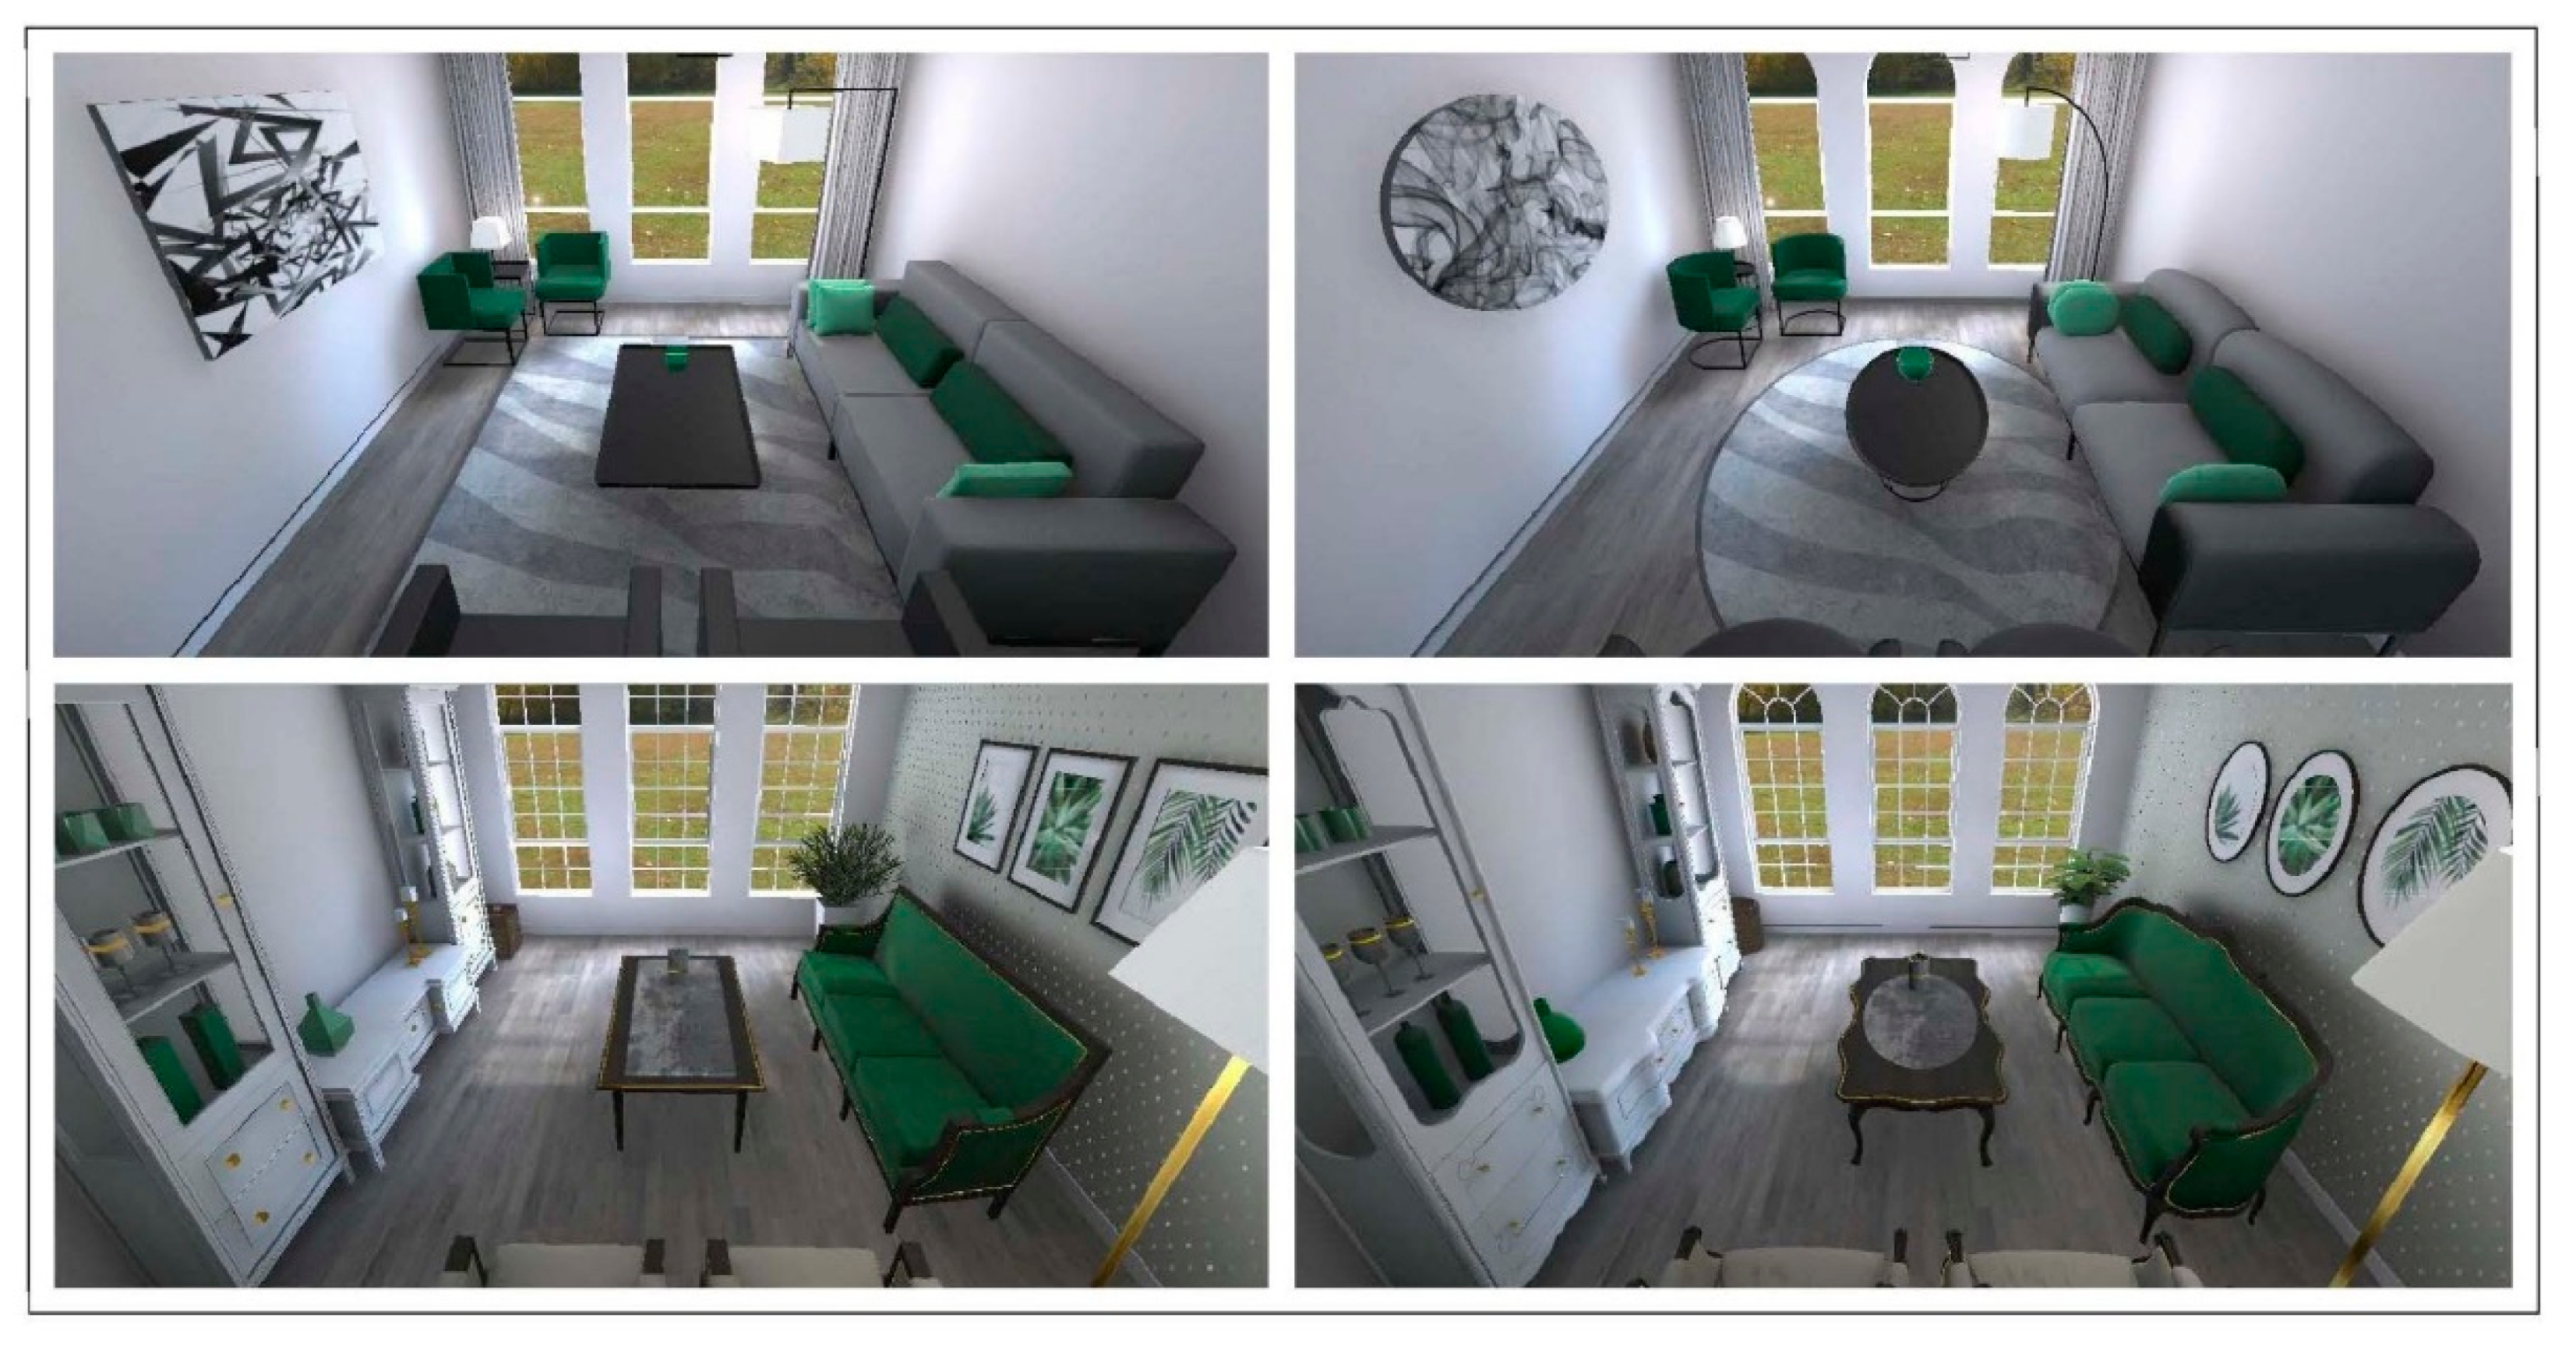 IJERPH | Free Full-Text | The Living Space: Psychological Well-Being and  Mental Health in Response to Interiors Presented in Virtual Reality